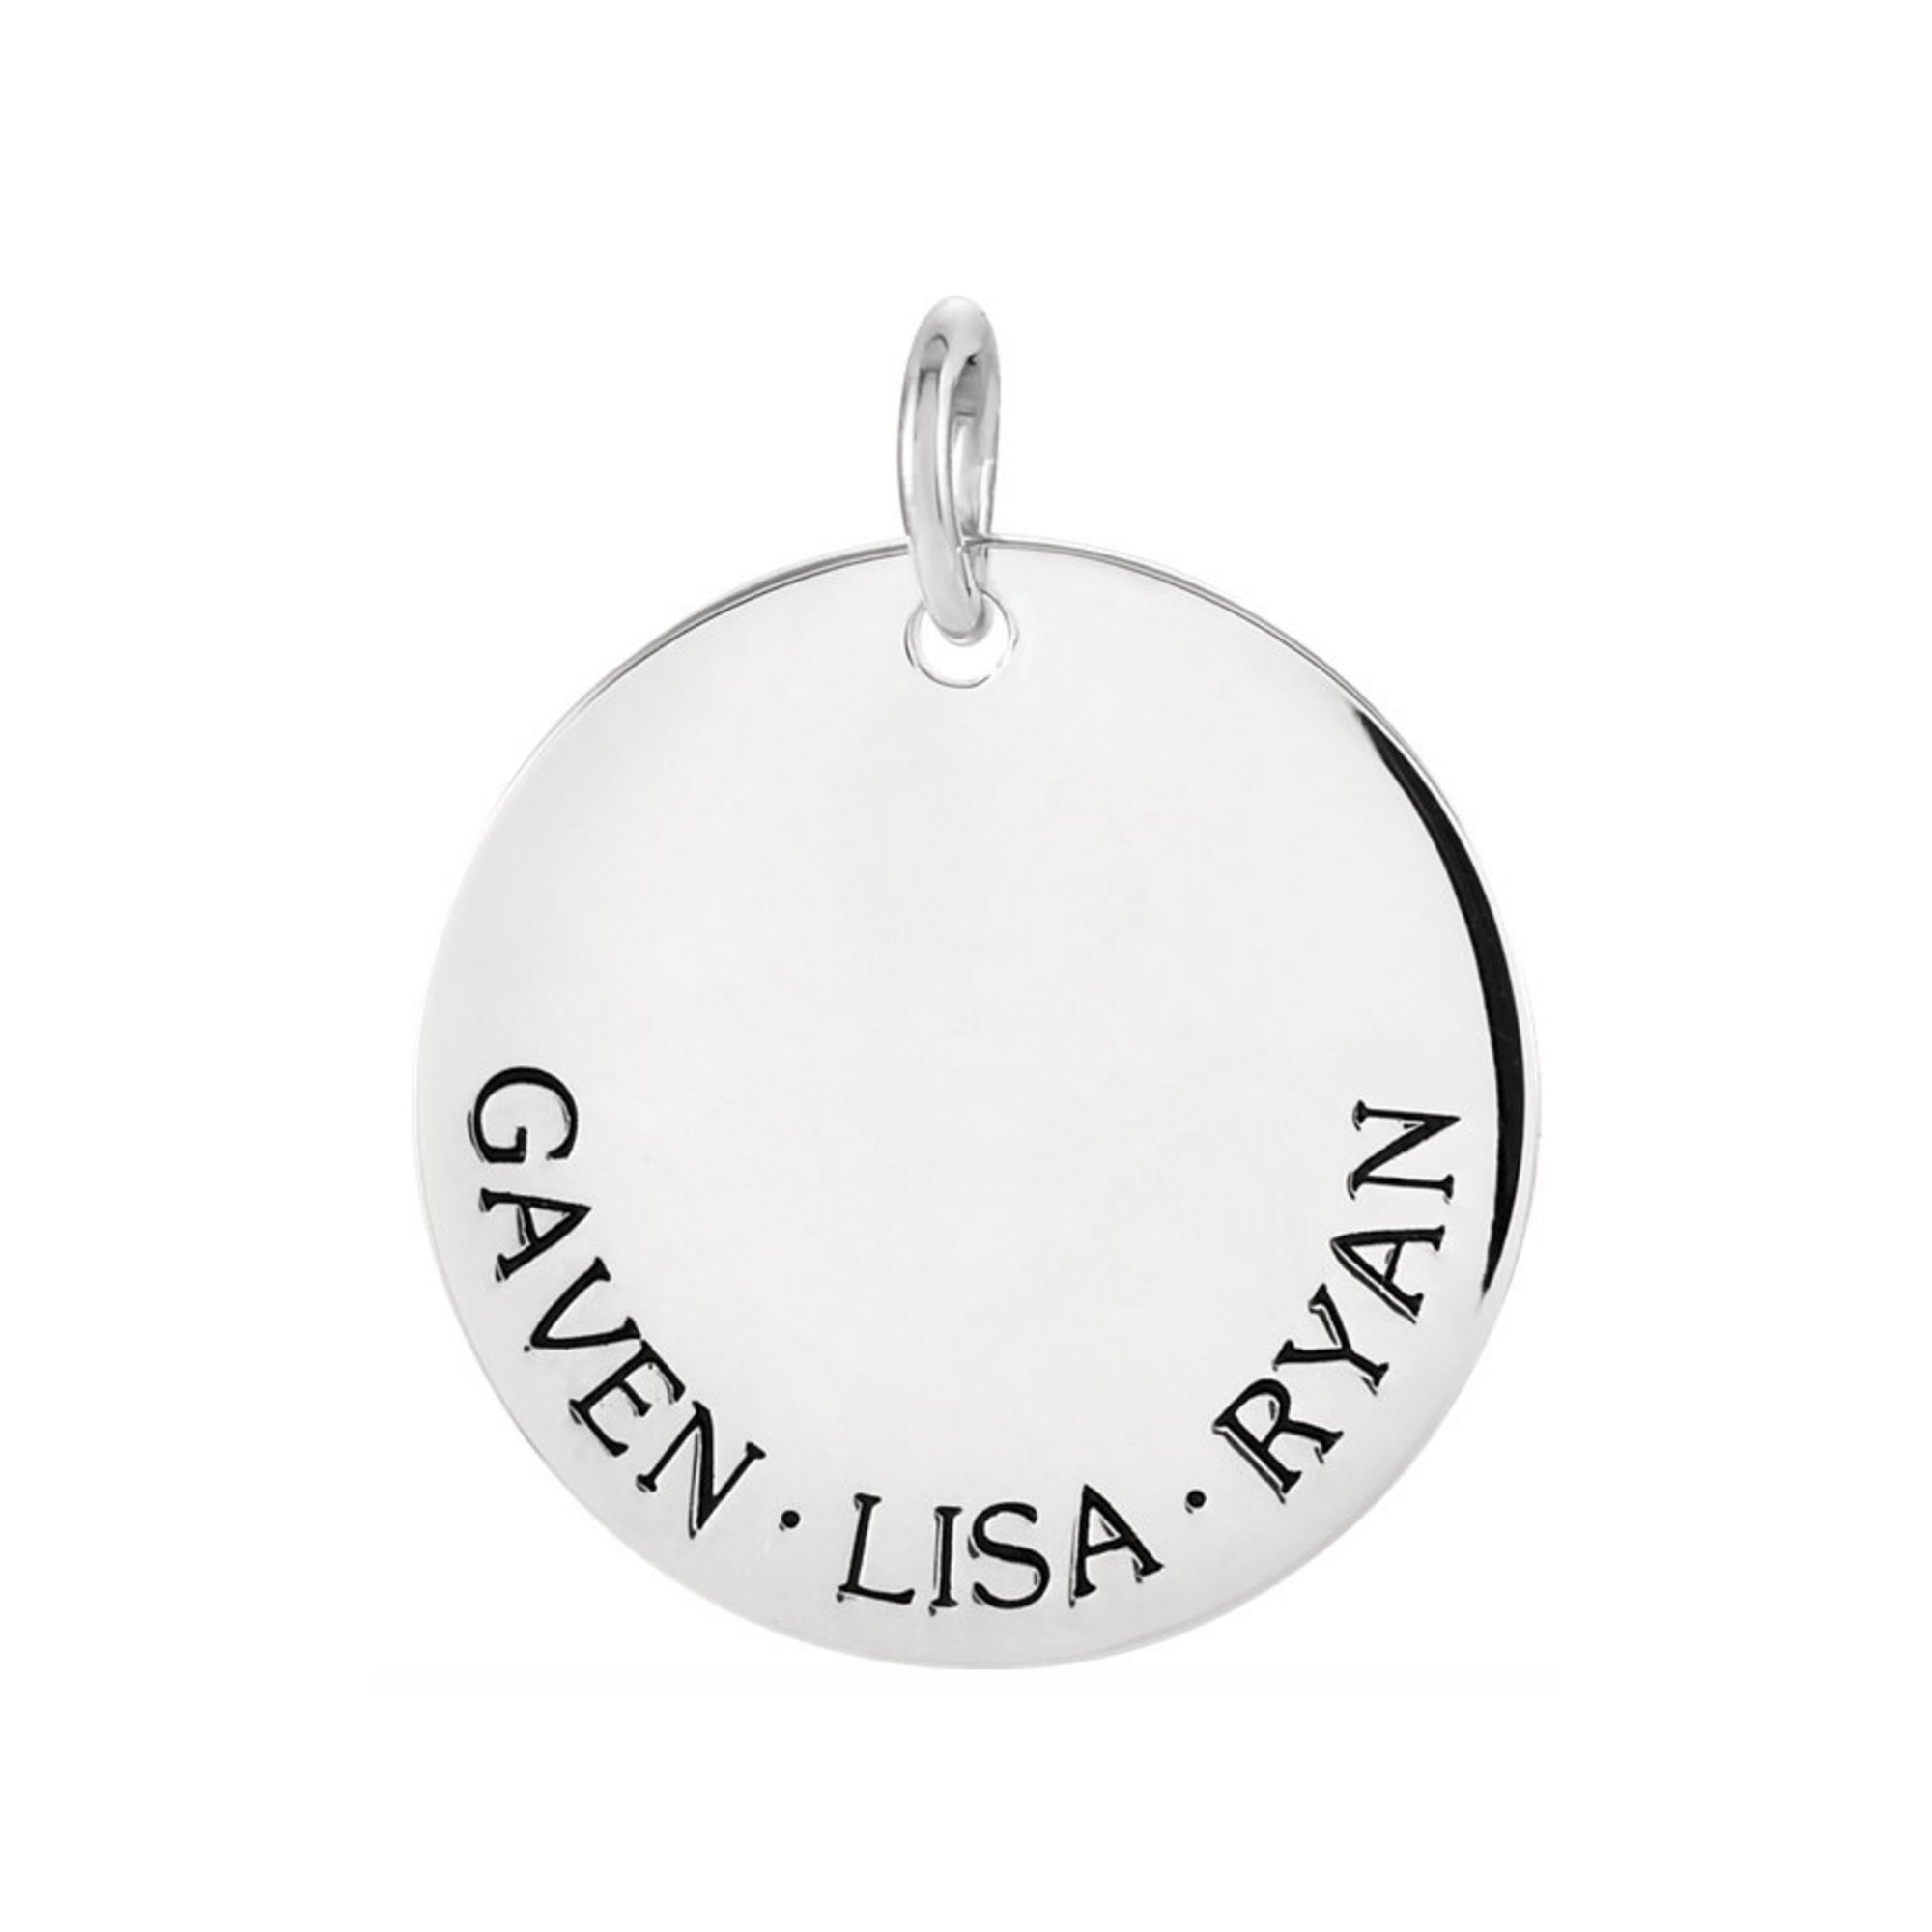 Large Engravable Disc Necklace in White, Yellow or Rose Gold - Talisman Collection Fine Jewelers